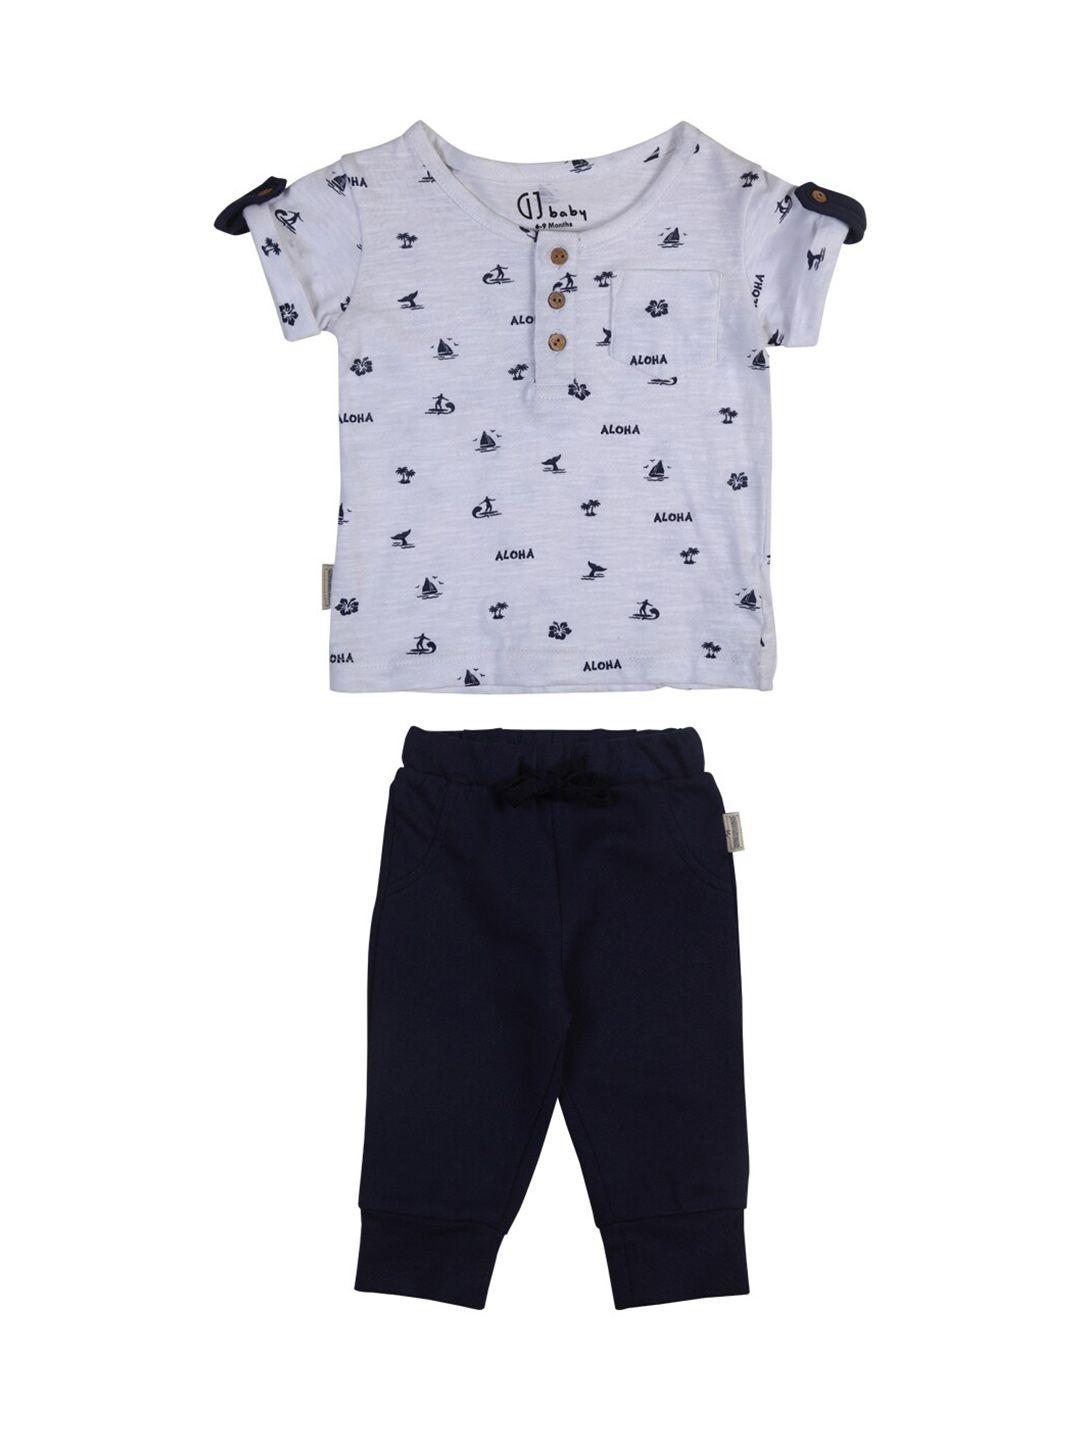 gj baby infant boys printed cotton t-shirt with trousers